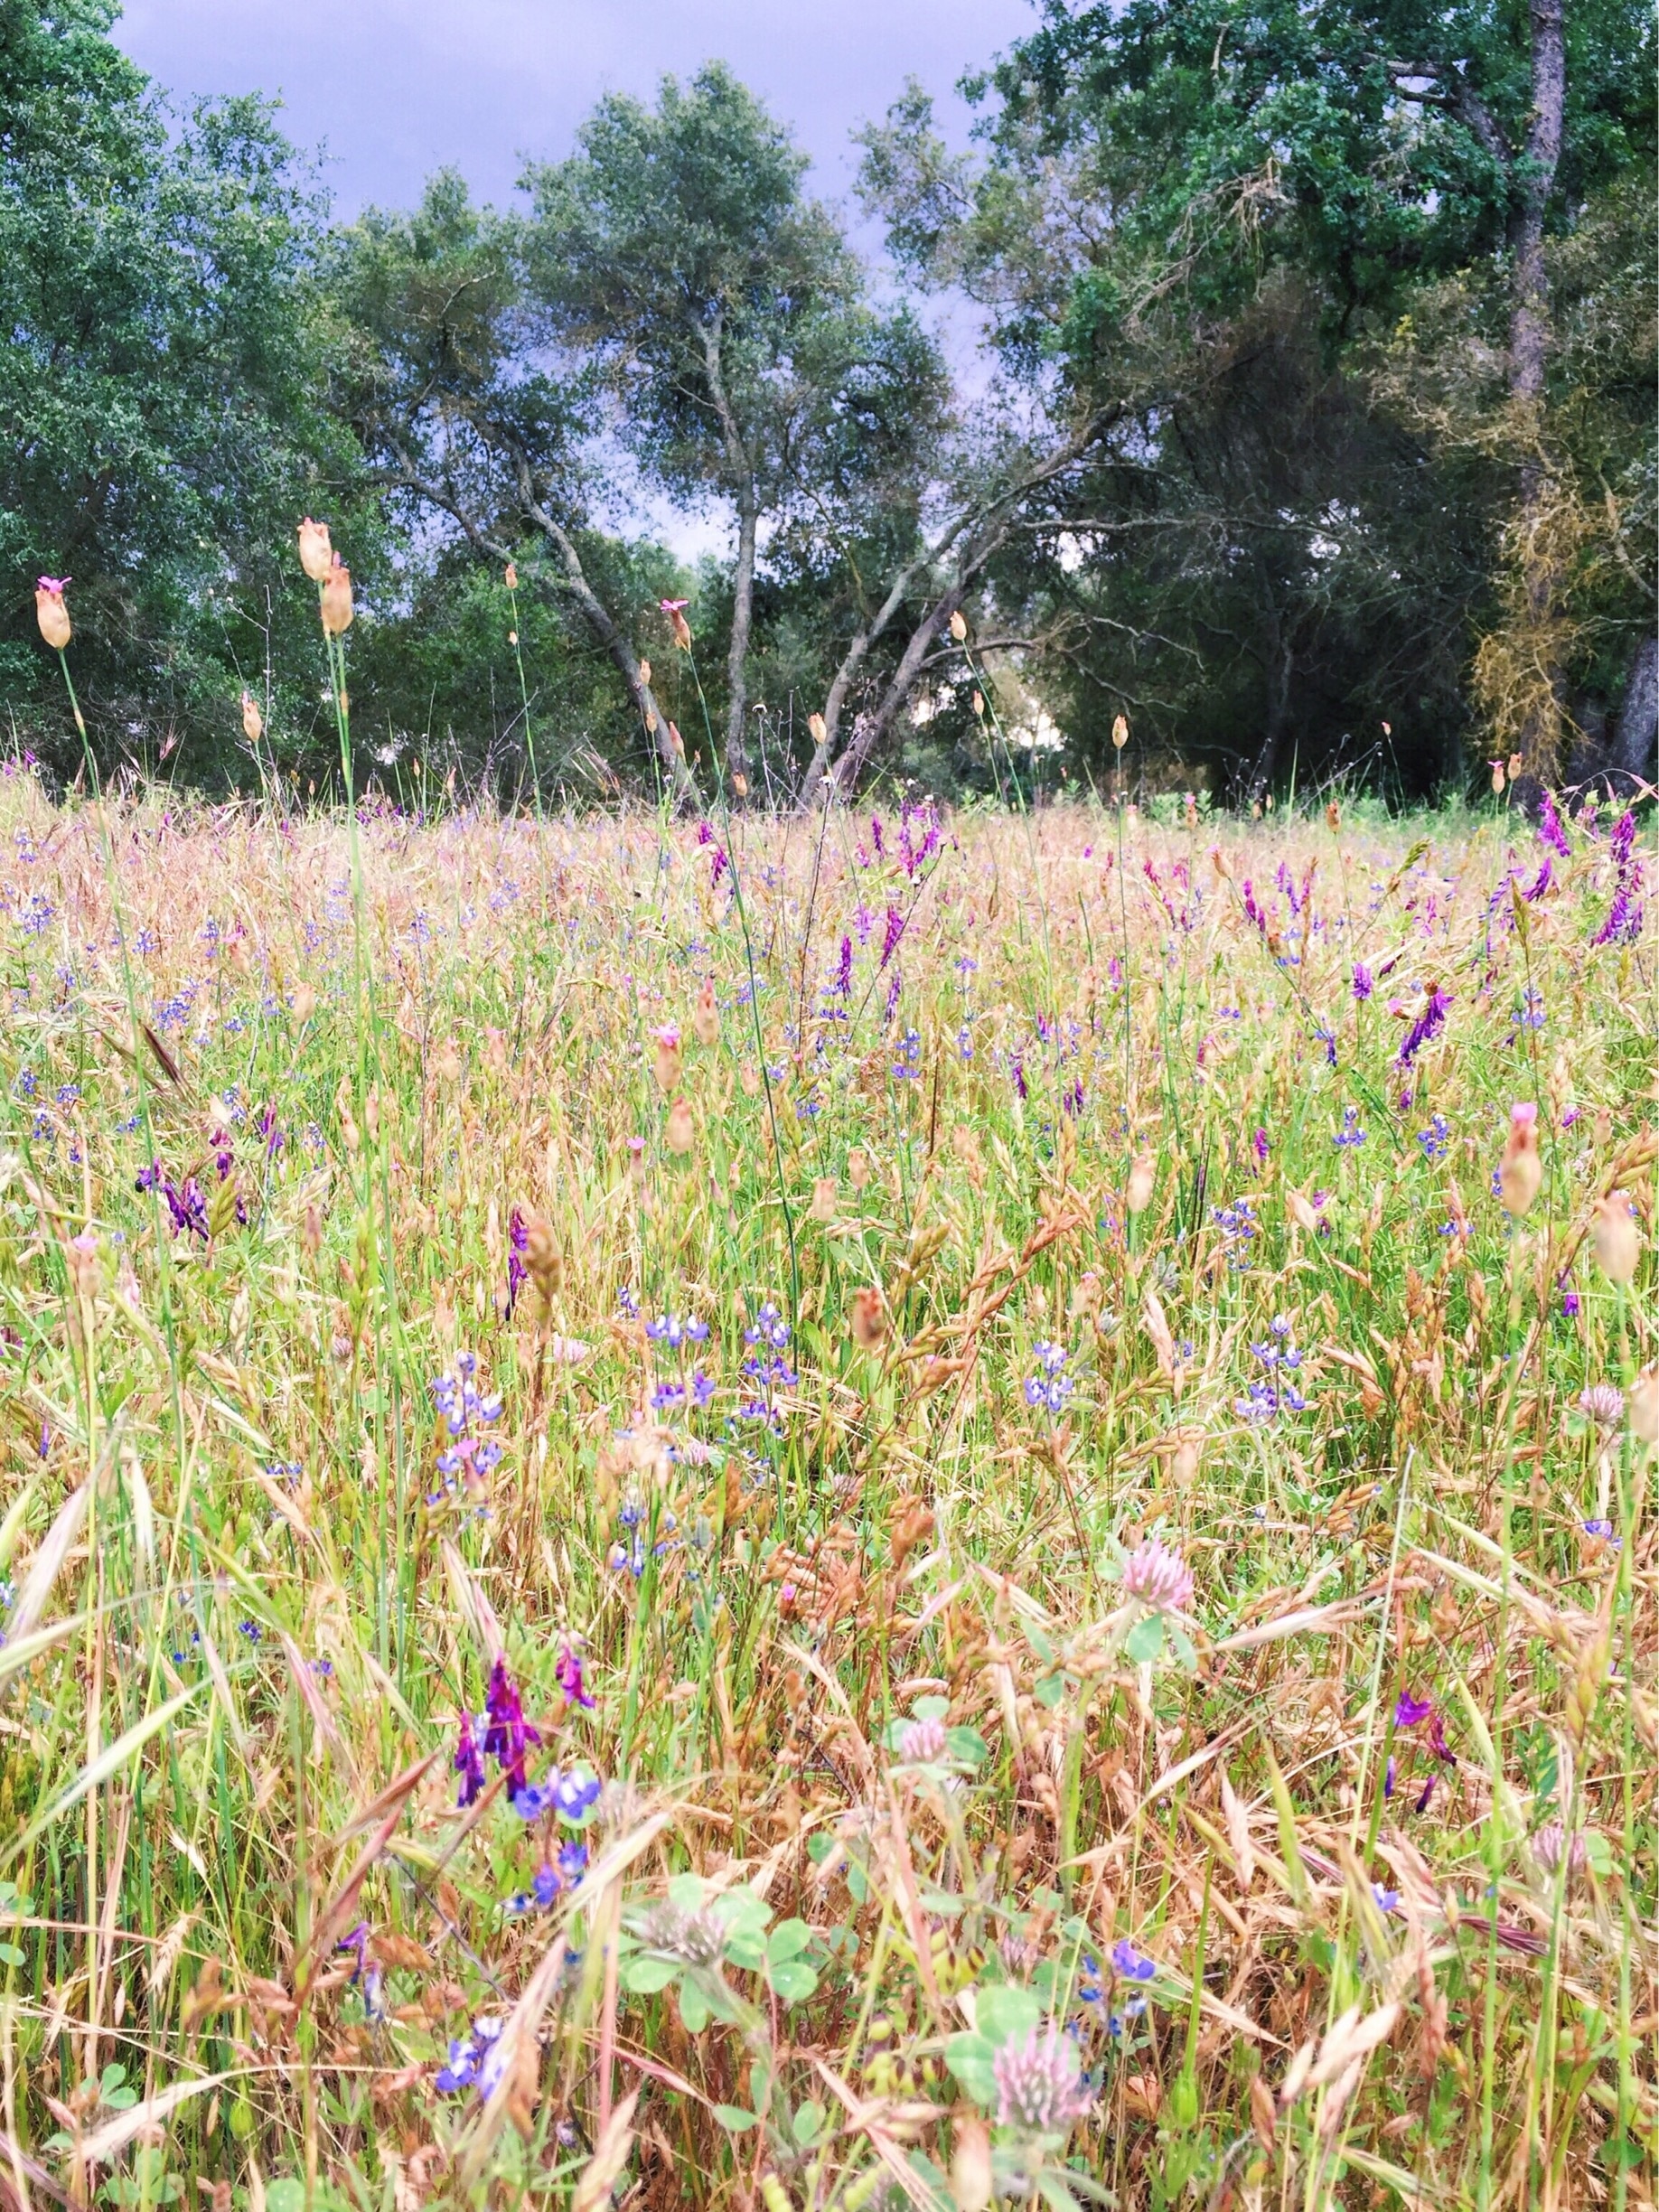 The wildflowers are blooming right now at the Effie Yeaw Nature Center near Sacramento! Take a walk around the paths and head down to the river! 
More on www.ajauntwithjoy.com